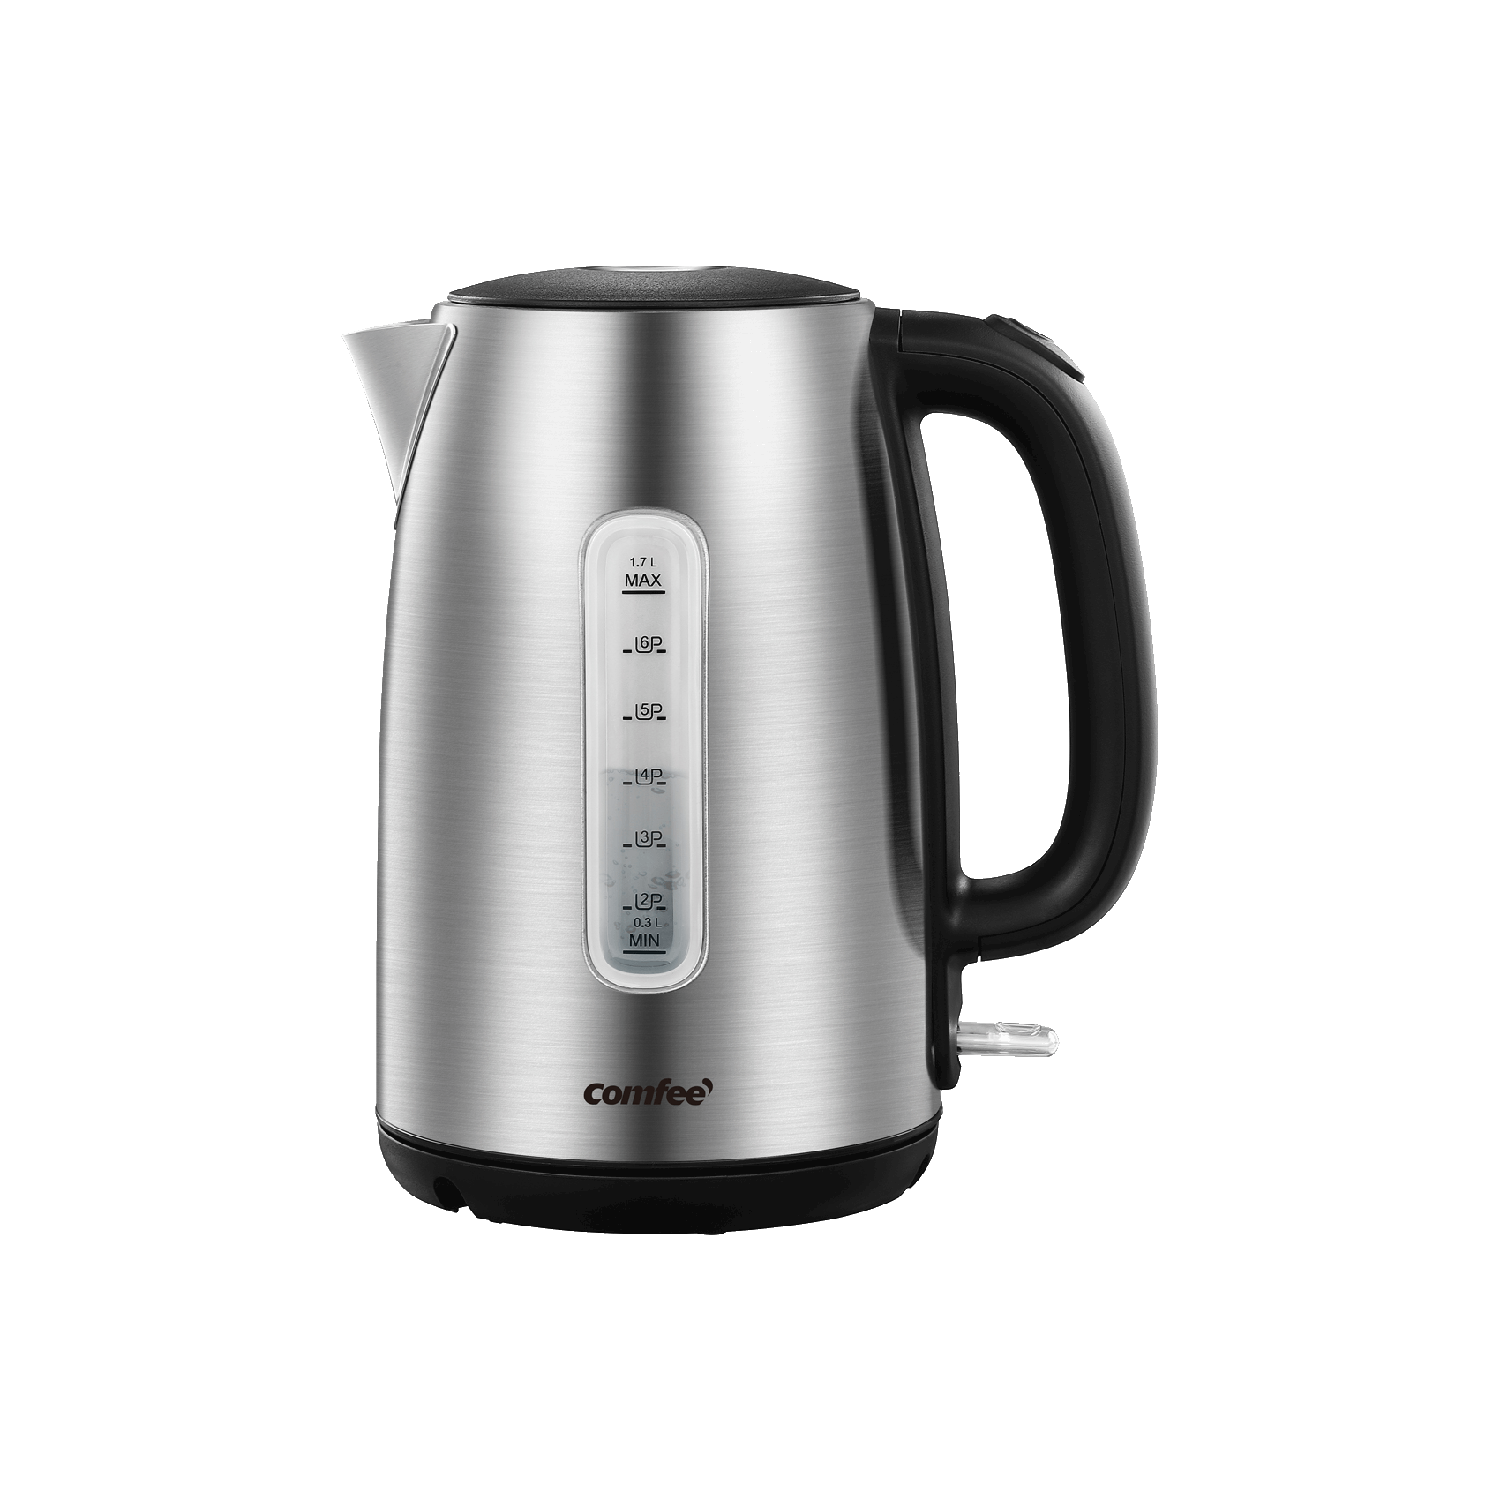 https://d1pjg4o0tbonat.cloudfront.net/content/dam/comfee-aem/global/products/small-appliances/stainless-steel-cordless-electric-kettle/kv1.png/jcr:content/renditions/cq5dam.compression.png